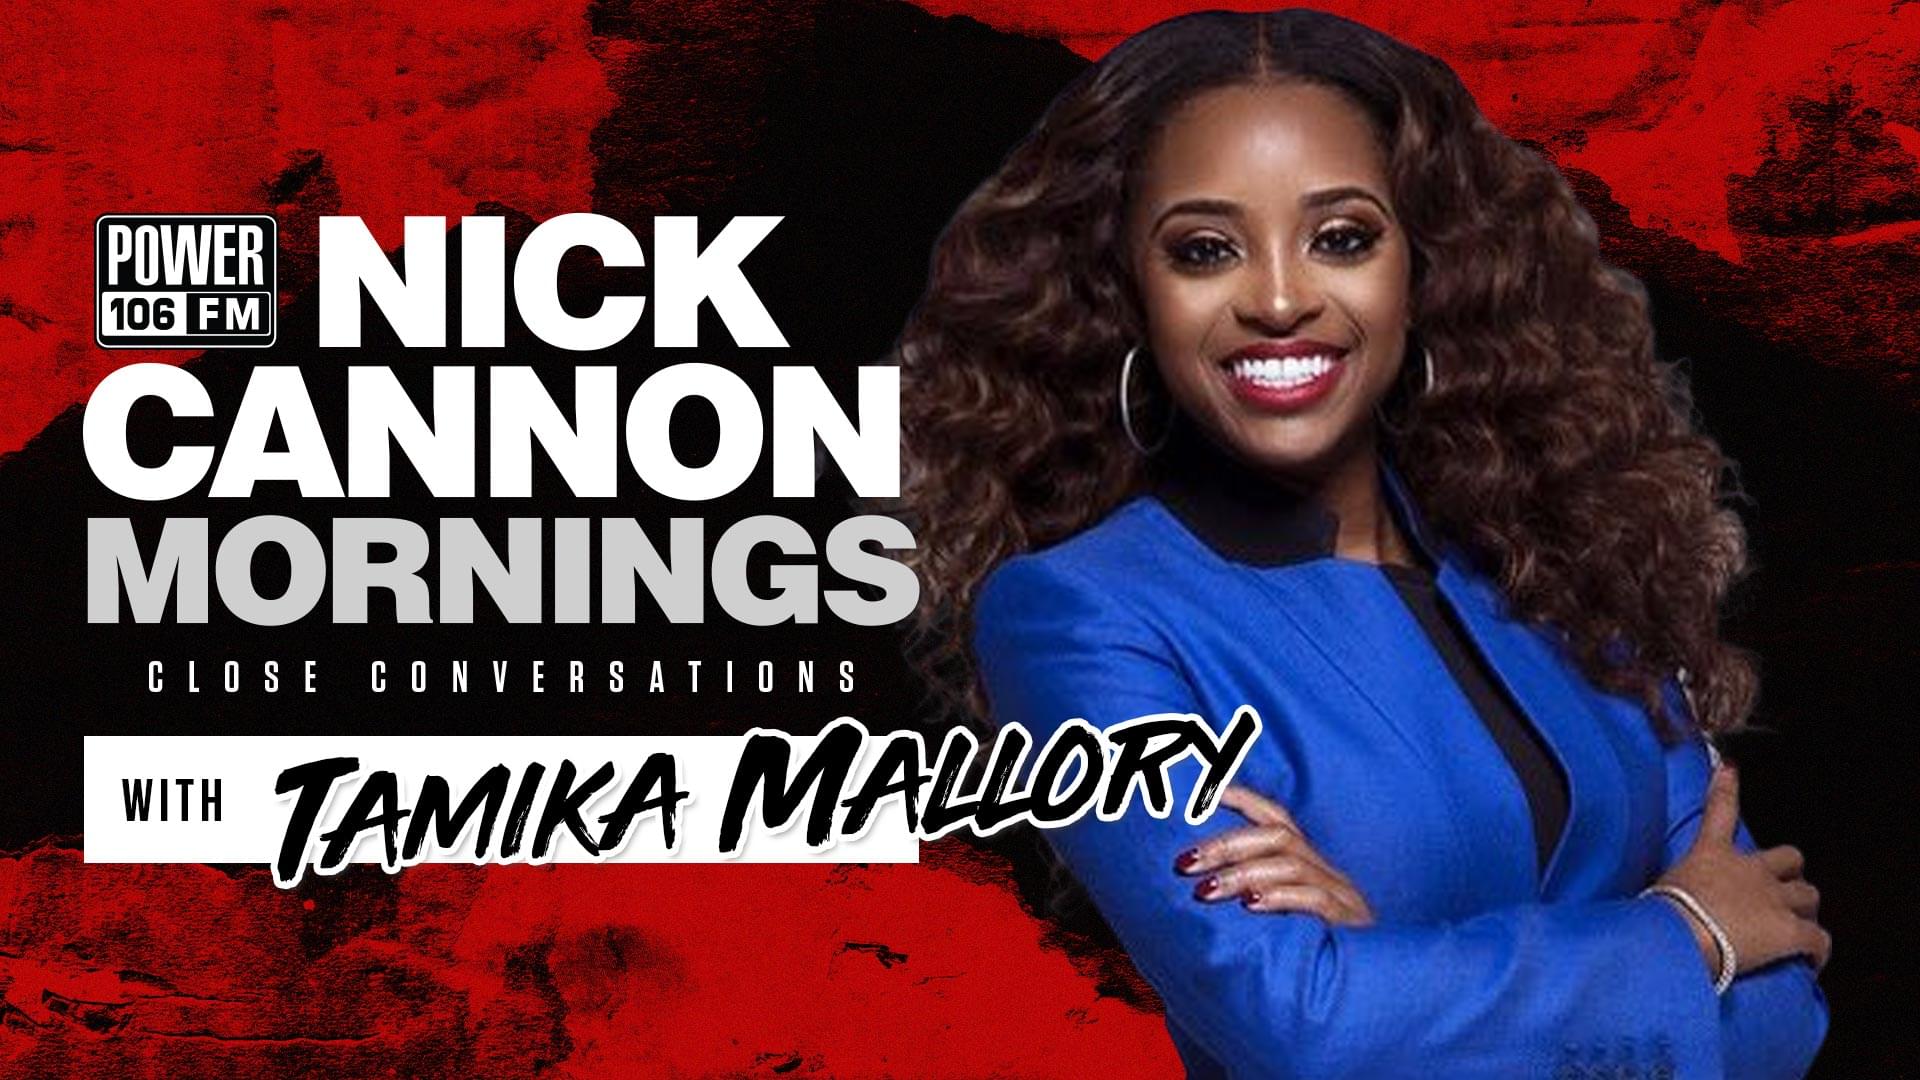 Activist Tamika Mallory Talks Policing & Patrolling, White Aggression in America, Being A Leader in The Black Community & More